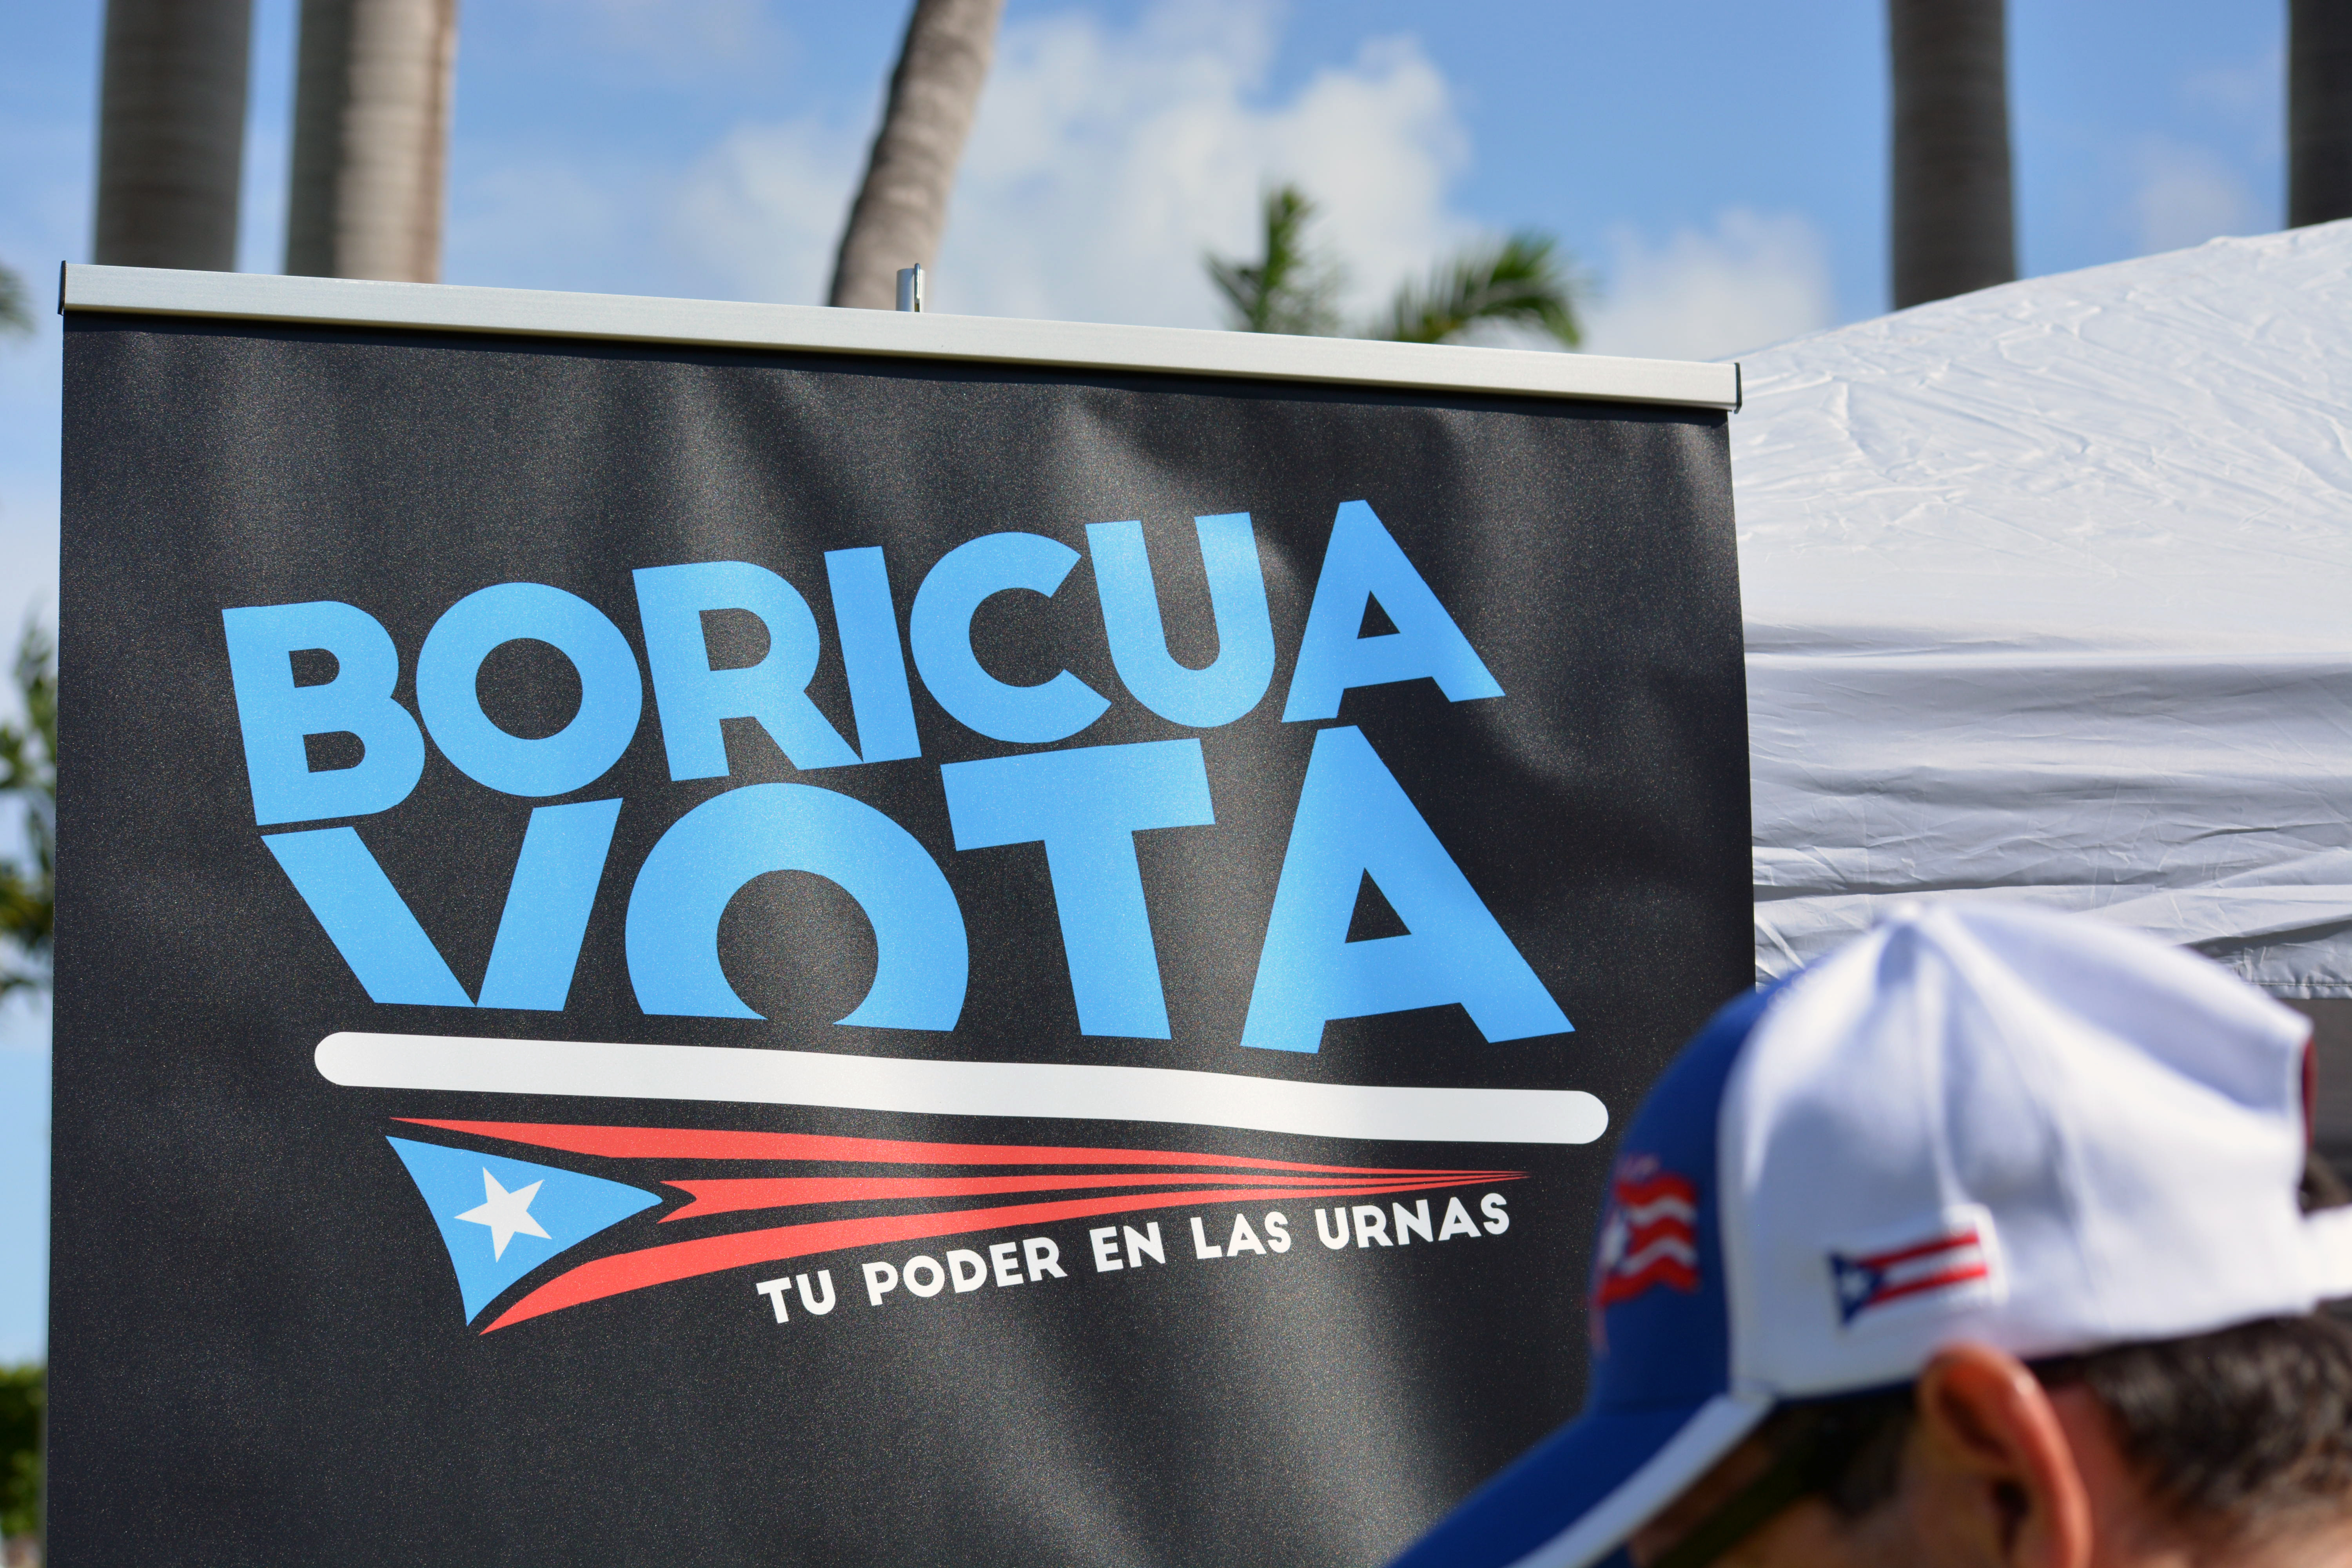 Boricua Vota booth at the rally (Photo by Sherrilyn Cabrera)